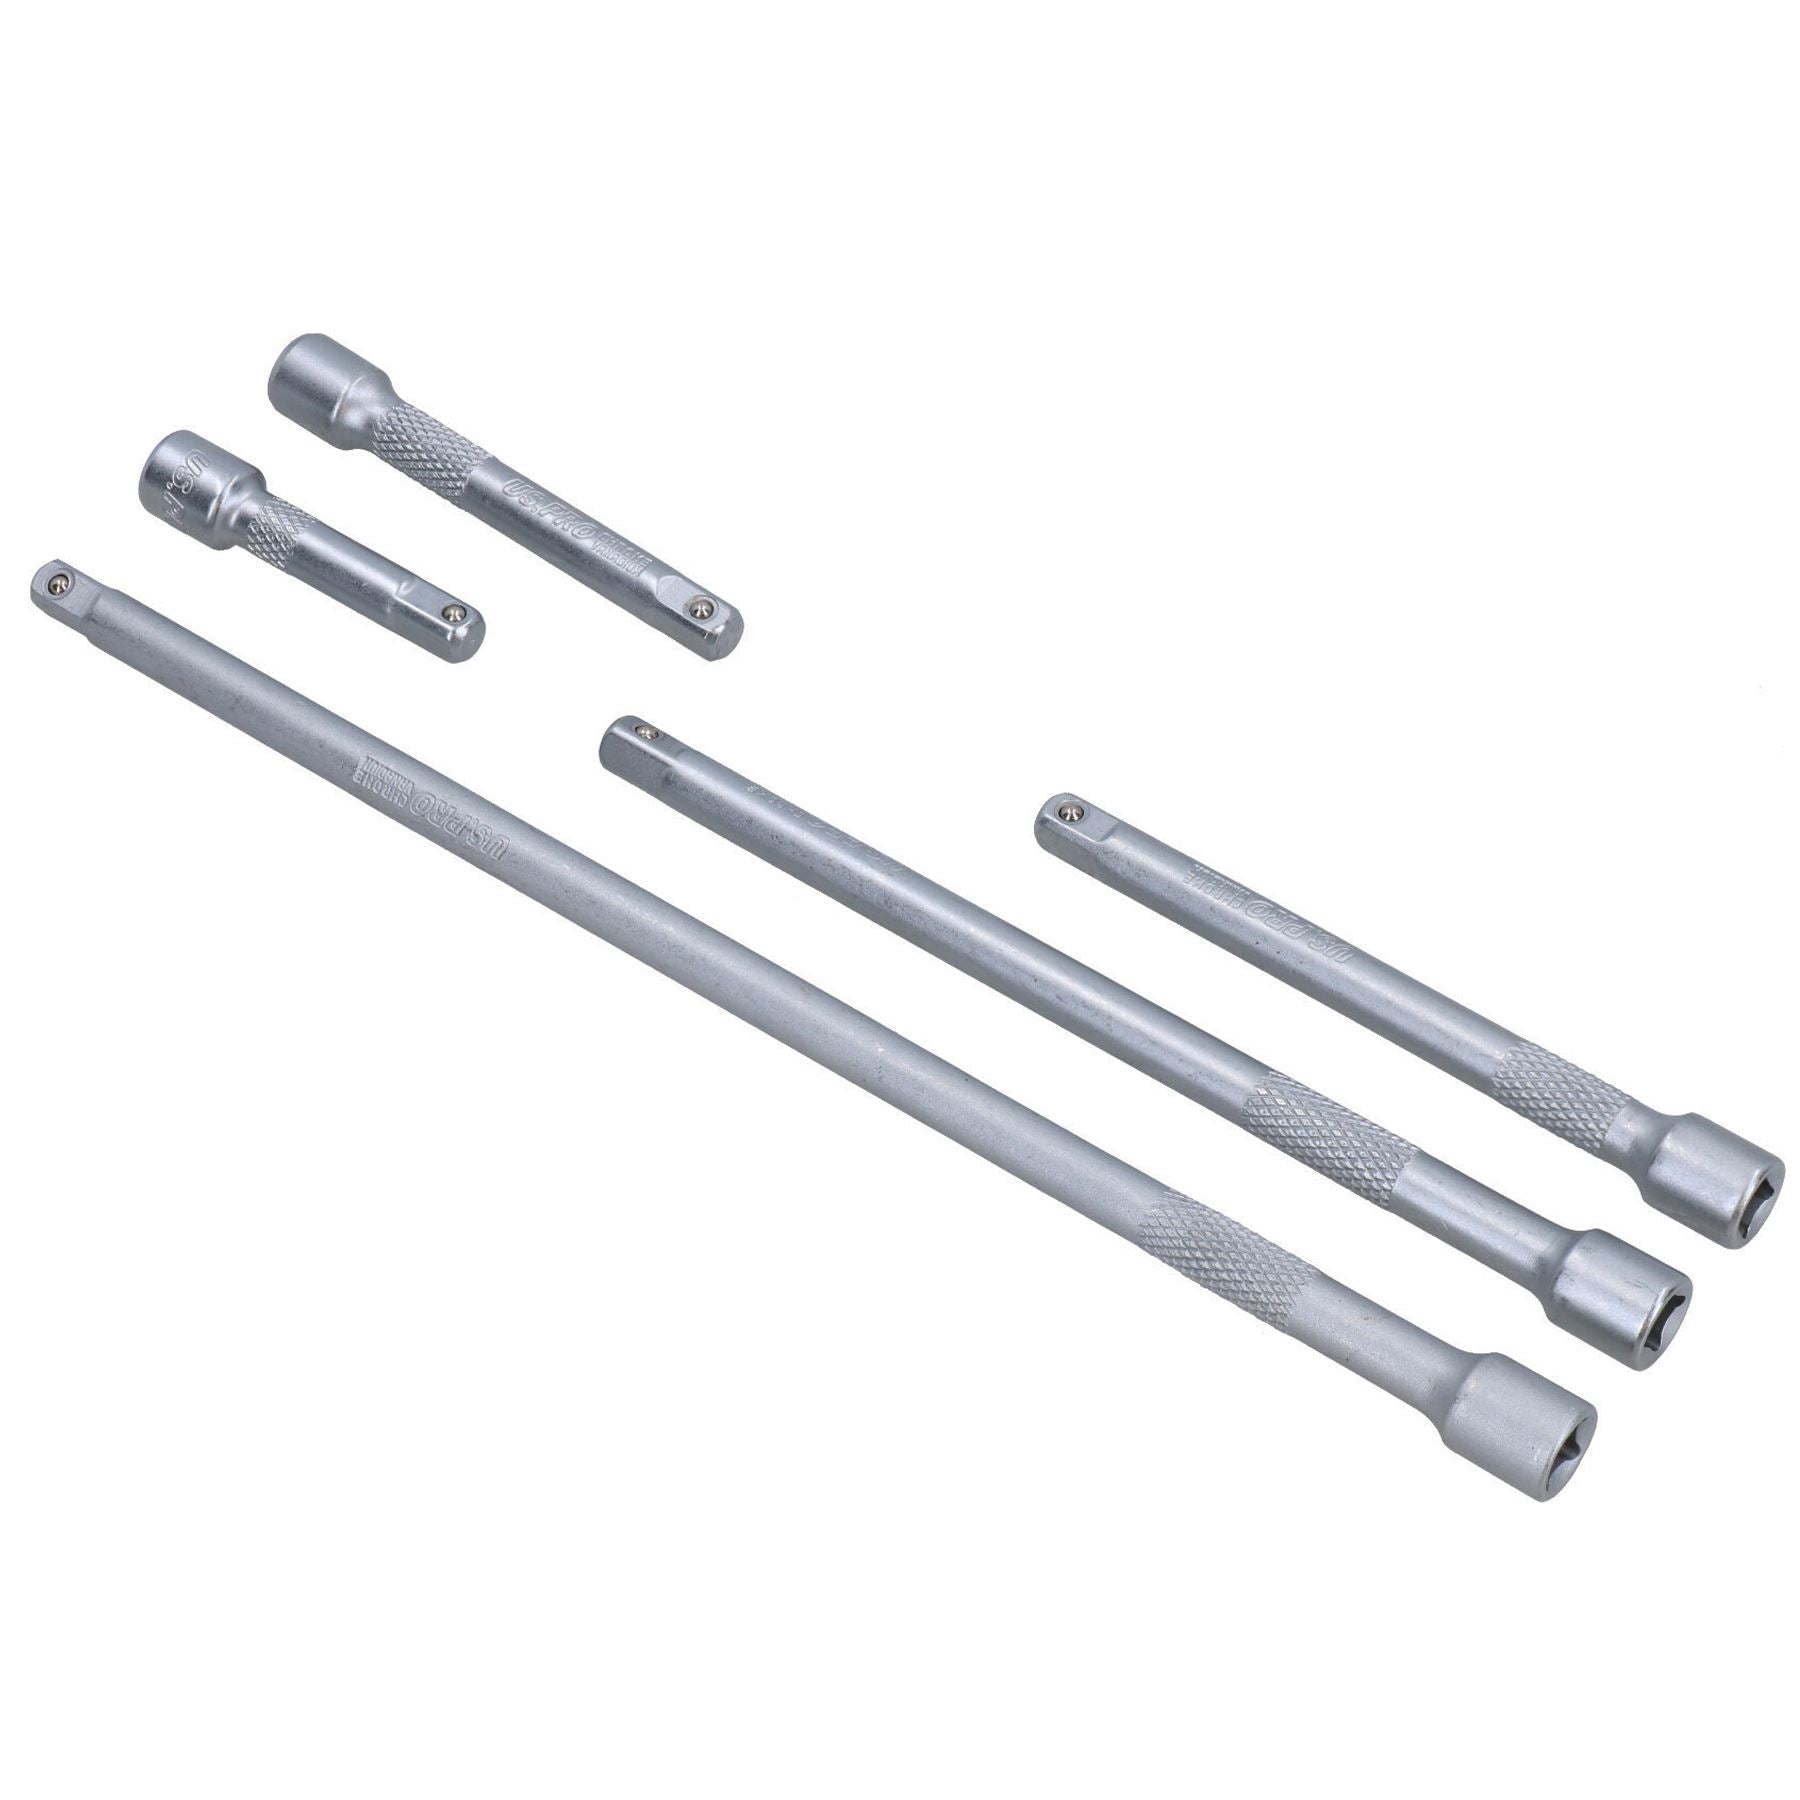 5pc 1/4" Drive Straight Extension Bar Set 2, 3, 4, 6 & 9" for Ratchets etc AT022